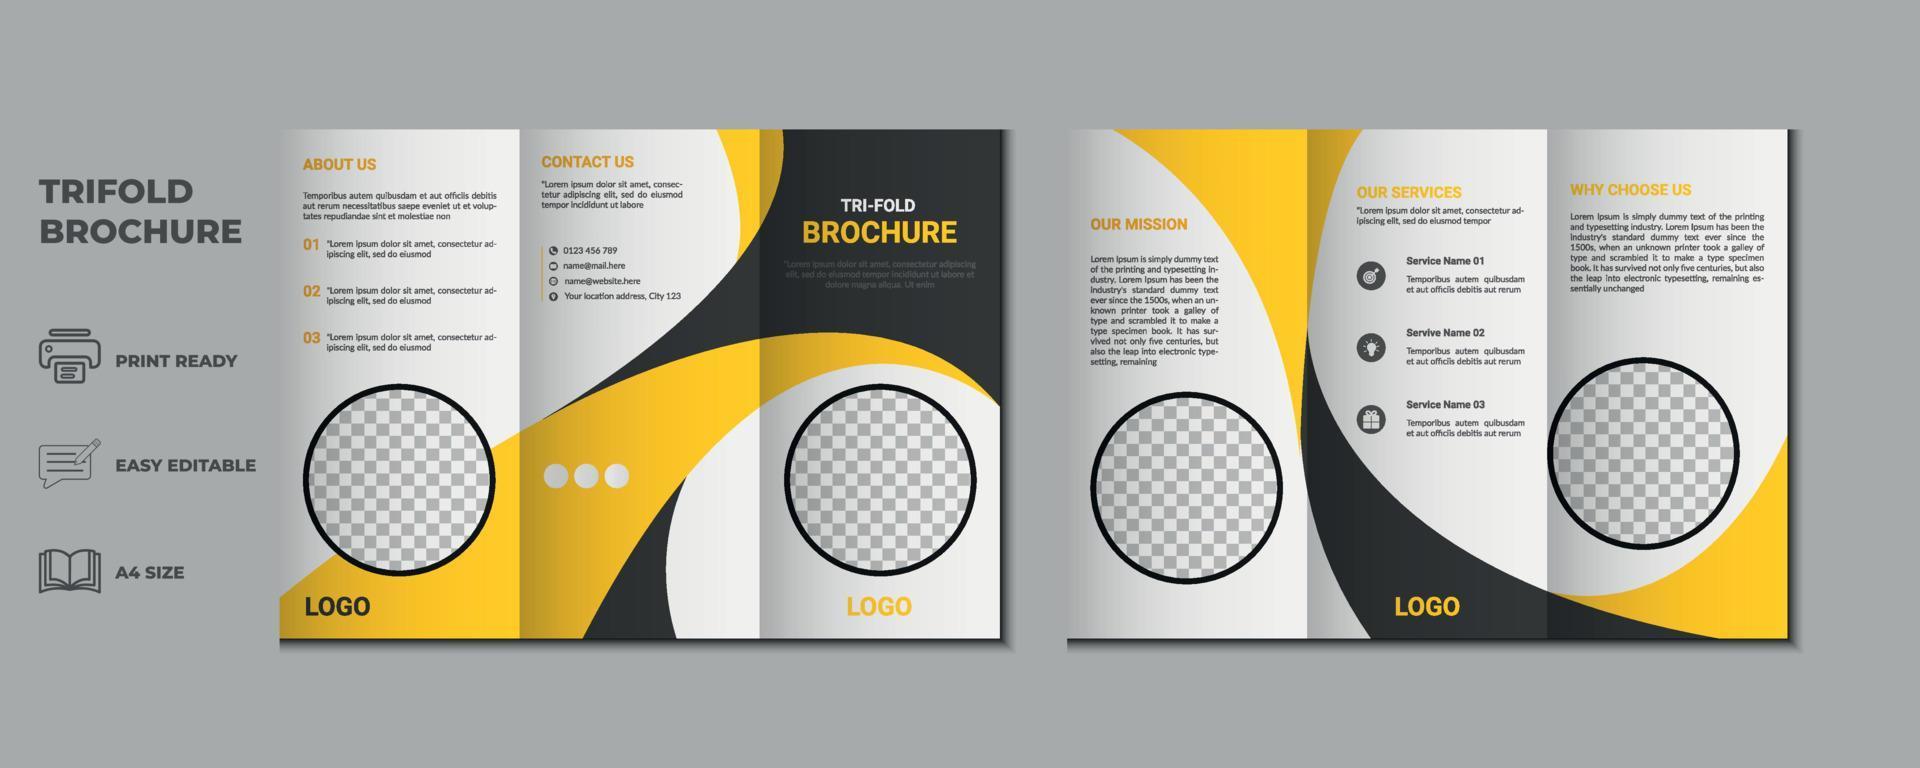 trifold brochure proposal Leaflet Flyer annual report magazine cover page three fold layout booklet company profile portfolio vector template and advertise presentation design